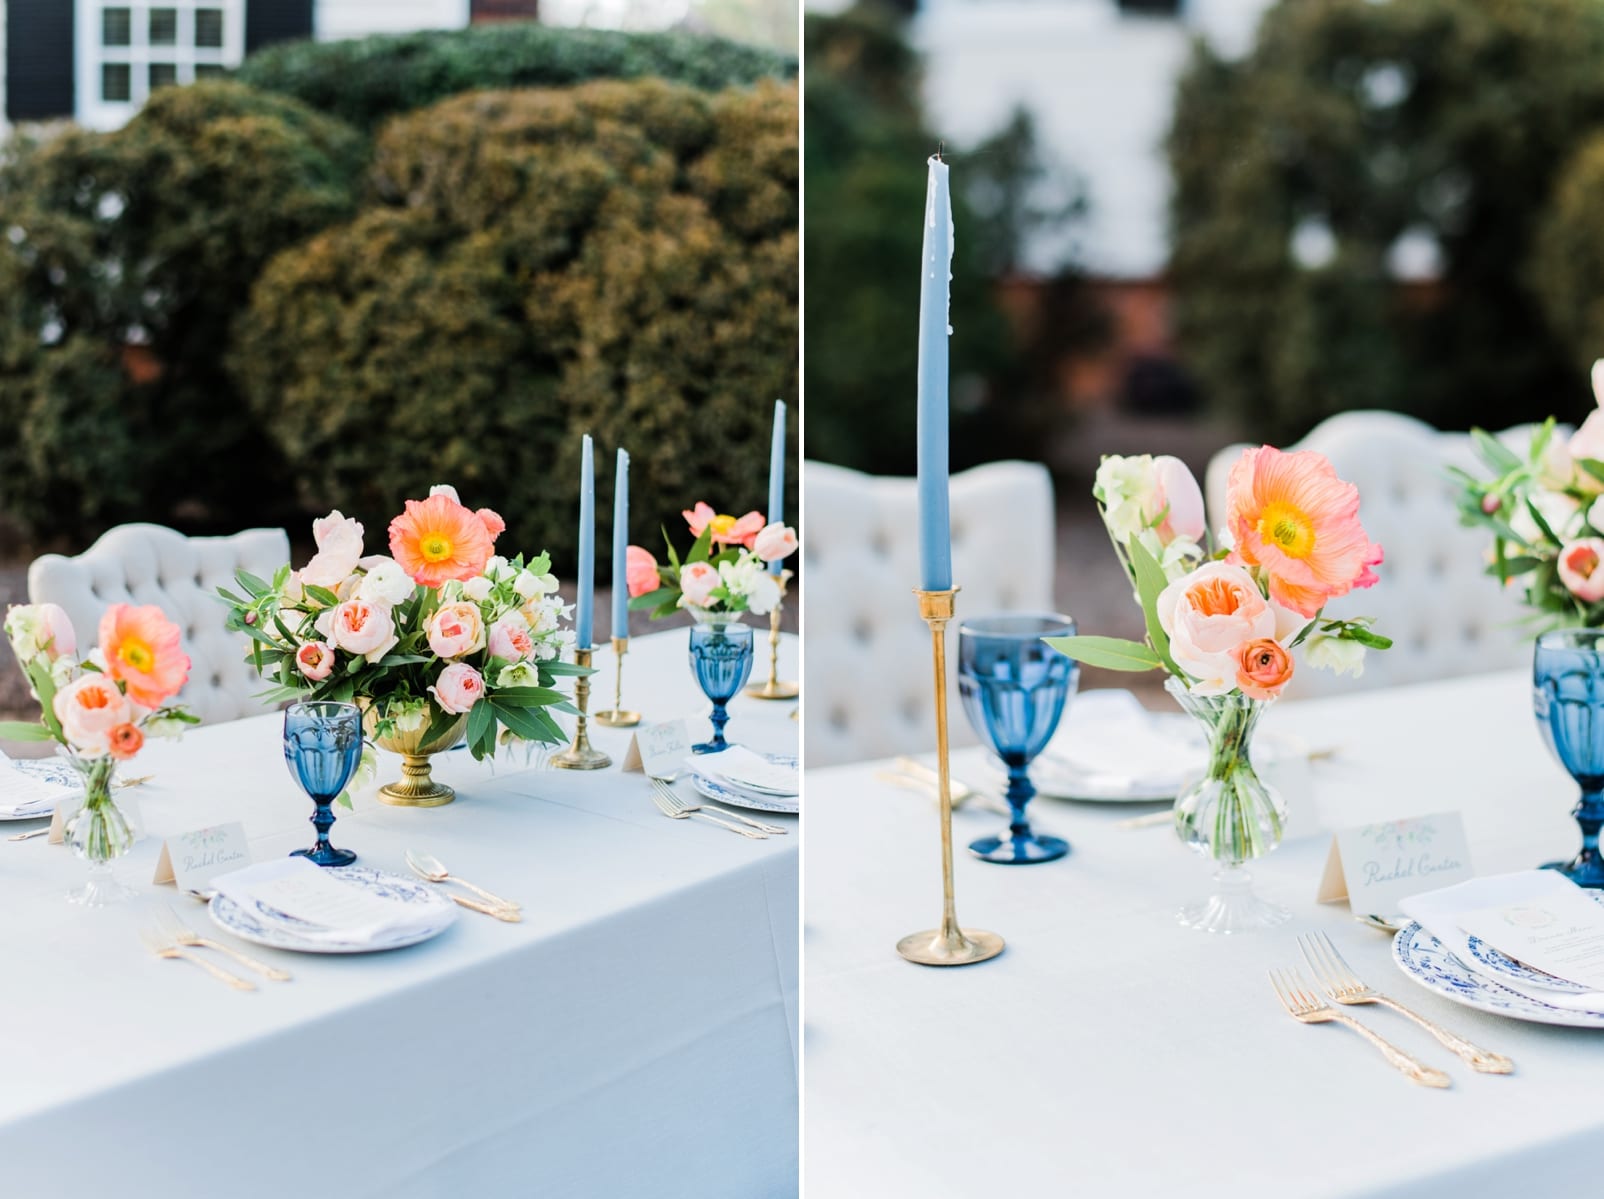 Greenhouse picker sisters reception table decor with light blue taper candles and peach florals photo